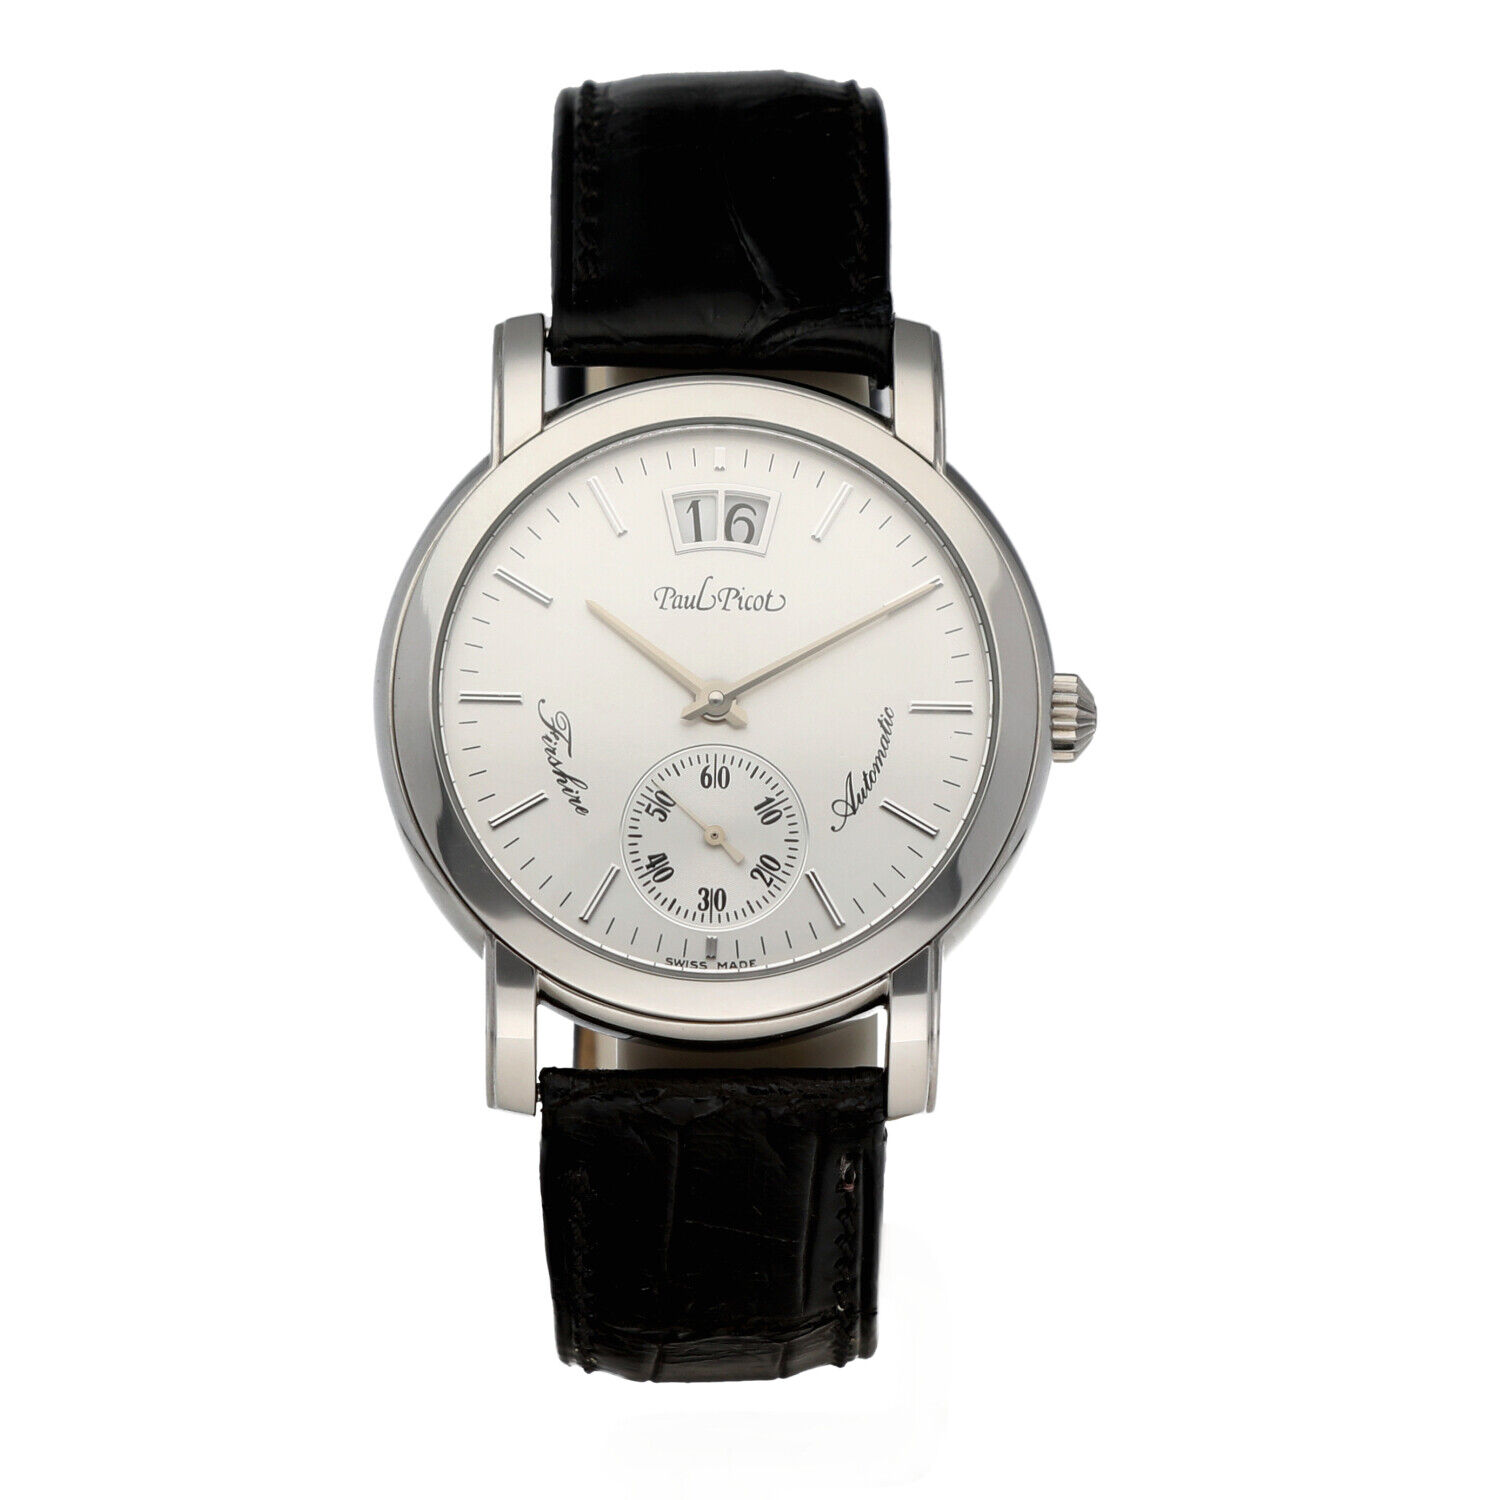 Paul-Picot-Firshire-Ronde-4091-Steel-375mm-Leather-Swiss-Automatic-Mens-Watch-125023849416